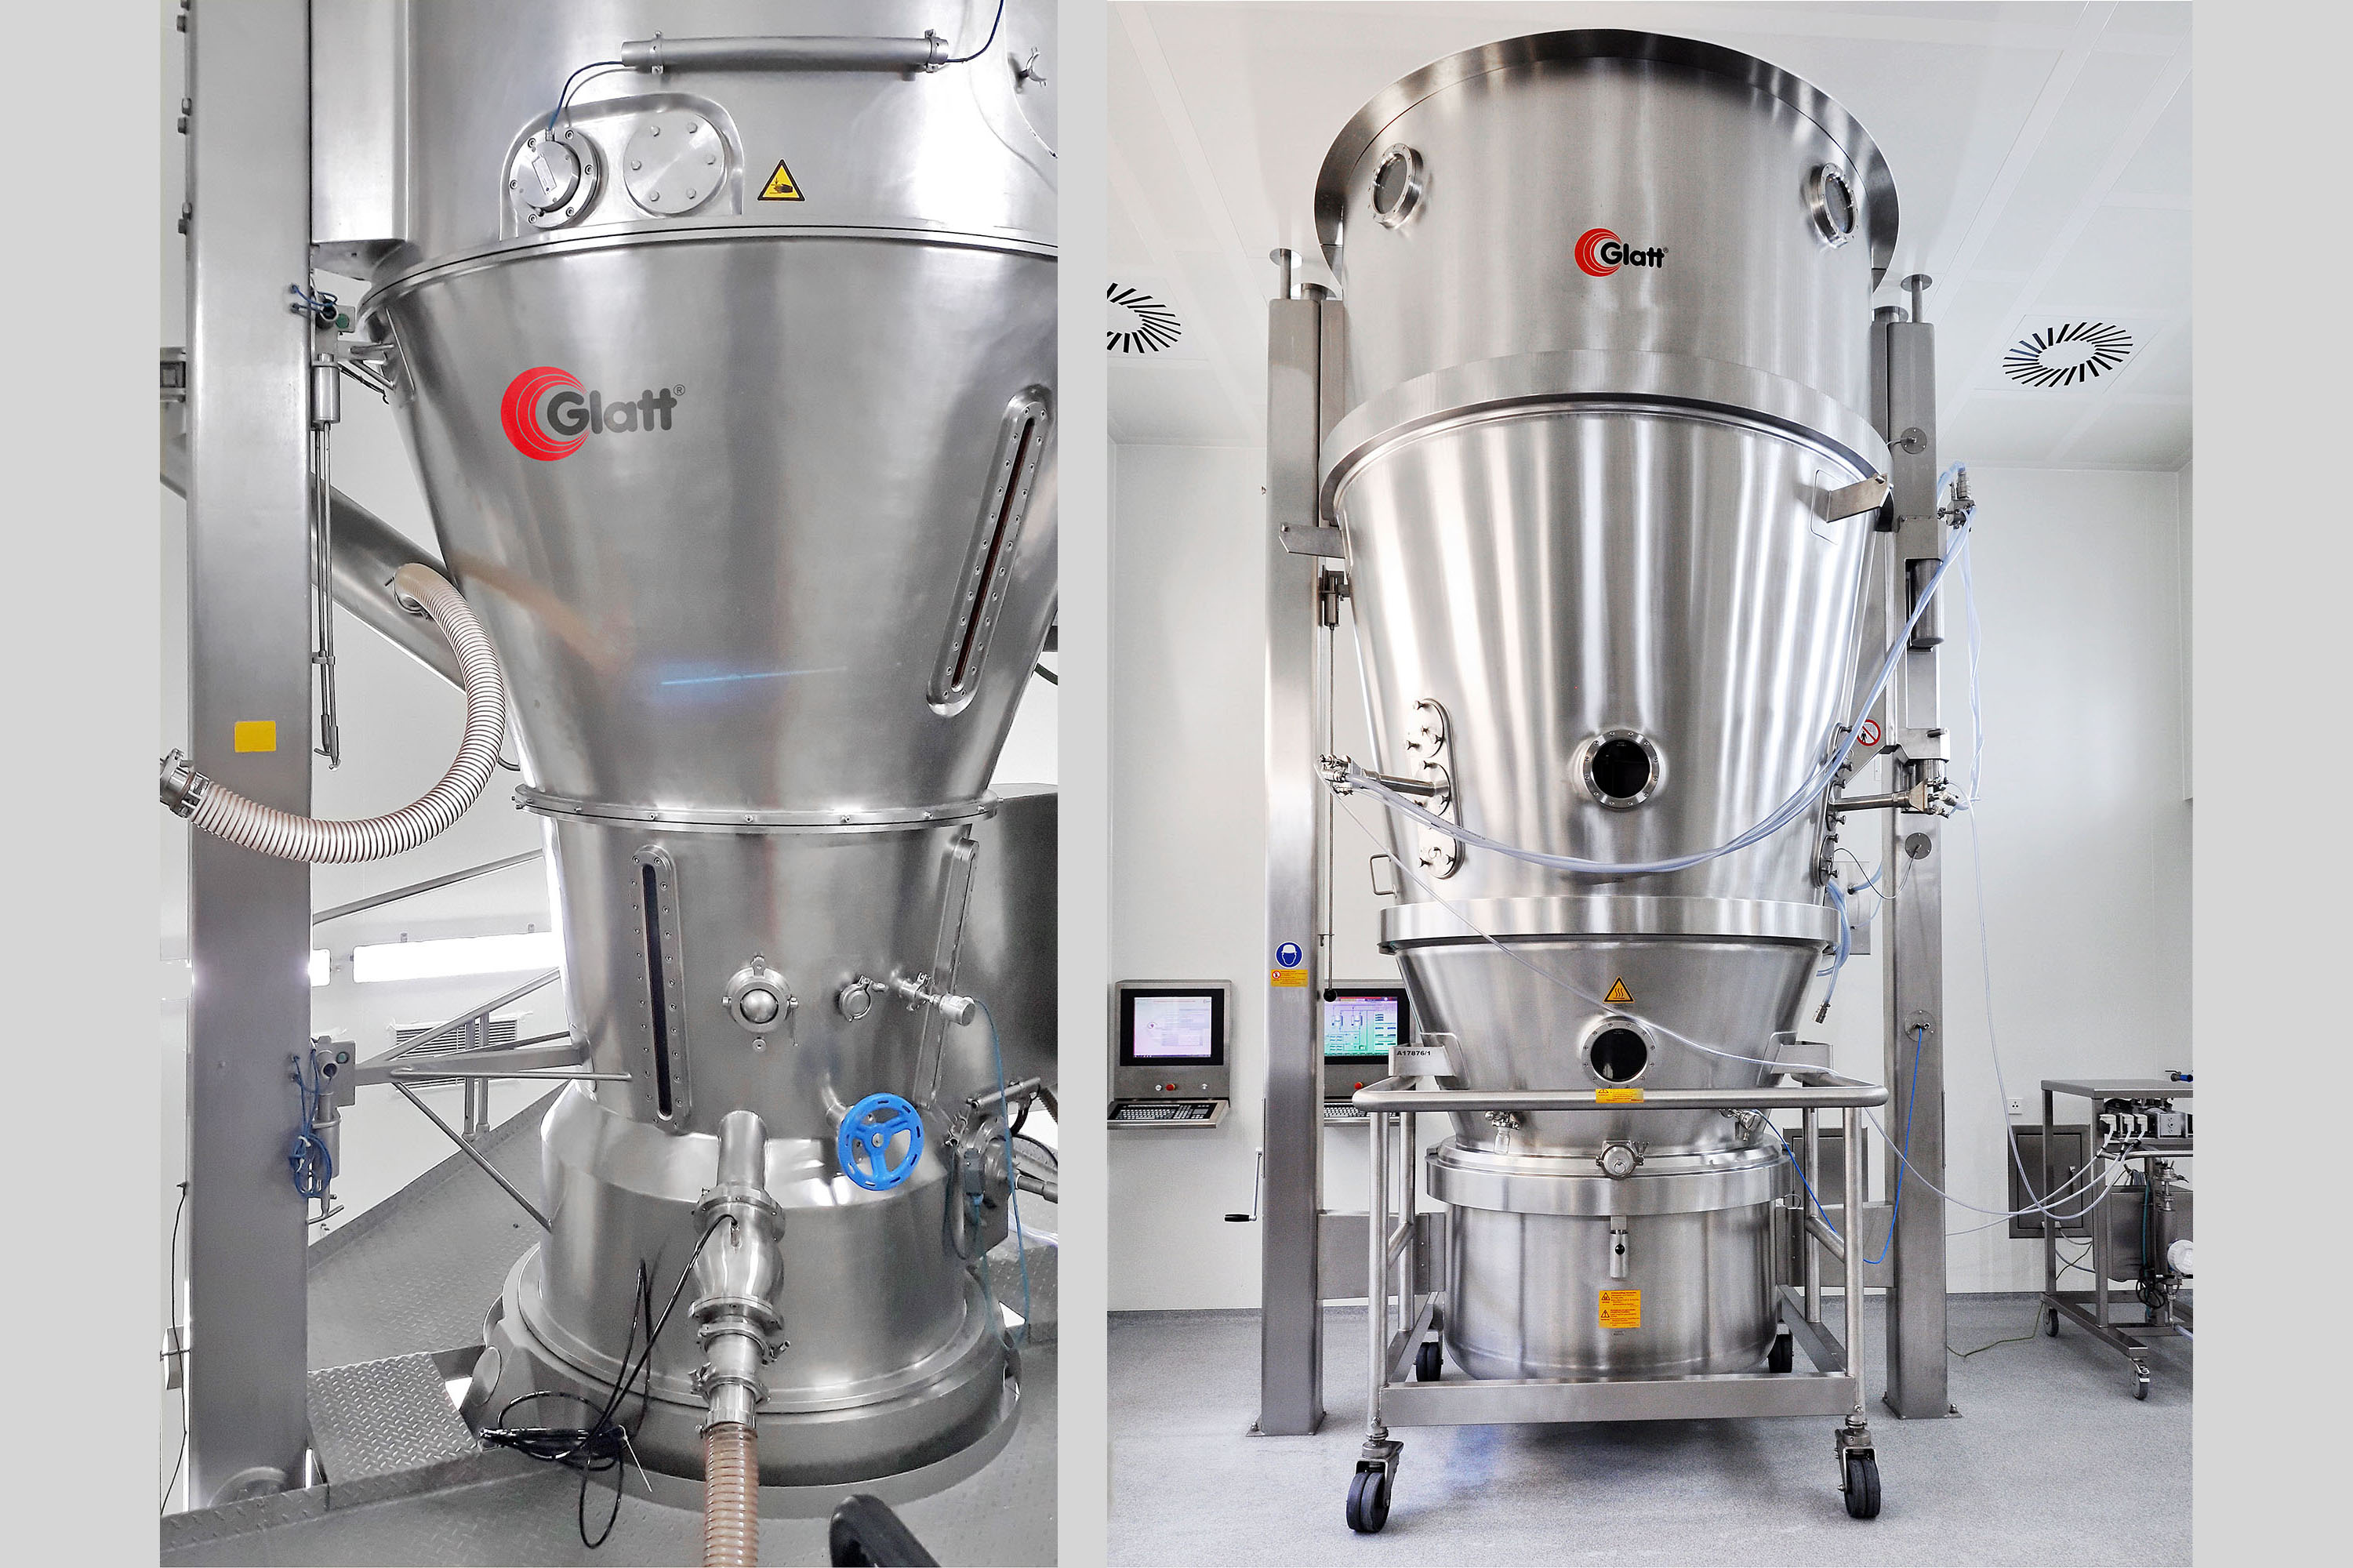 New fluid bed options for solvent-based processes and products requiring Kosher and Halal conditions